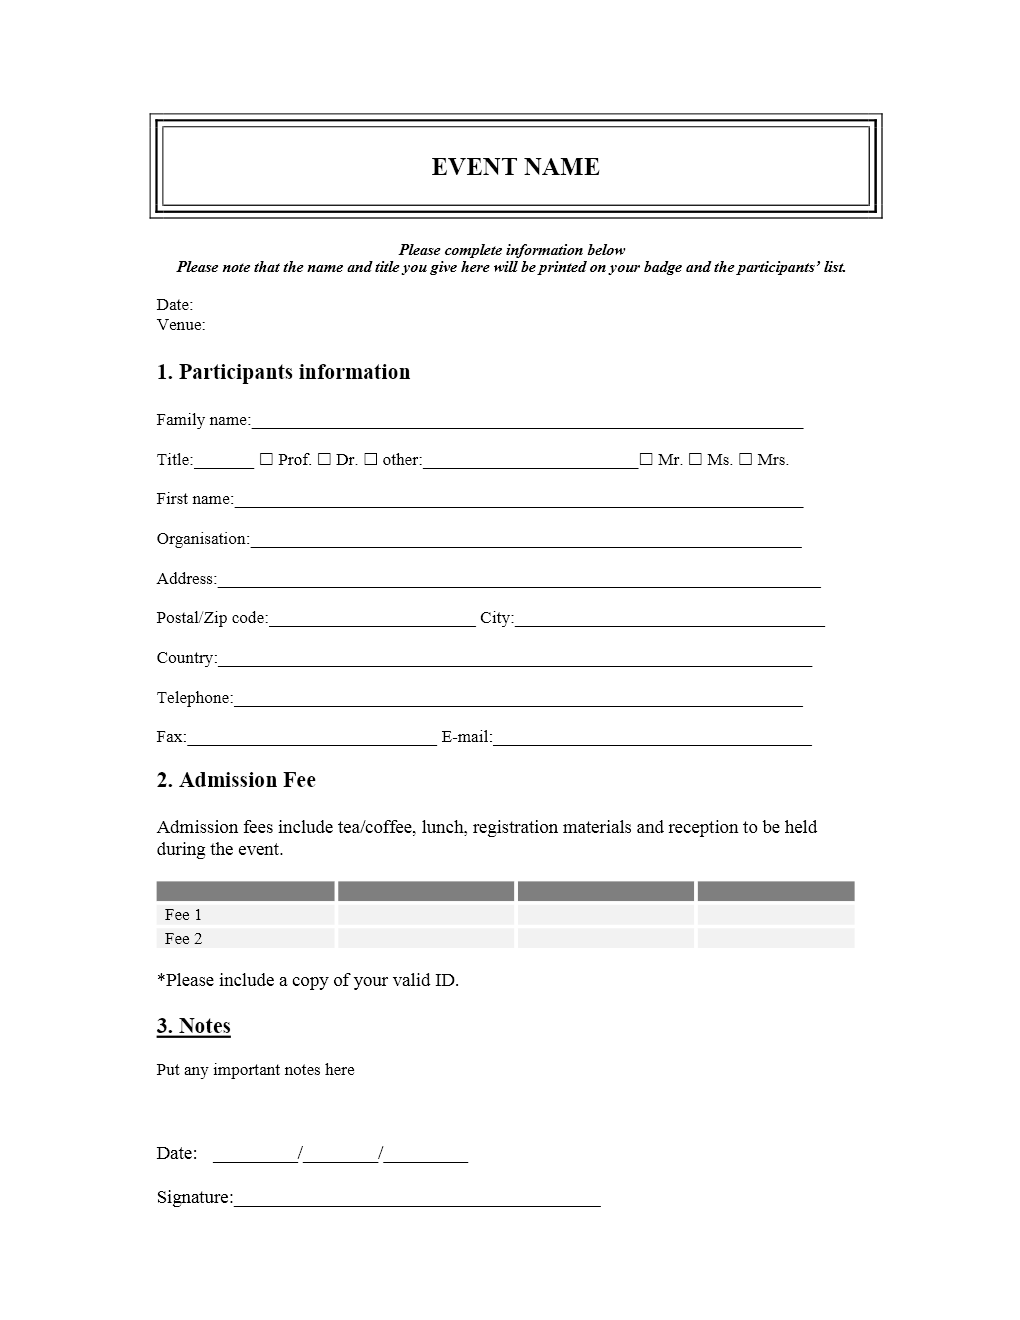 sign up form template word   Gecce.tackletarts.co